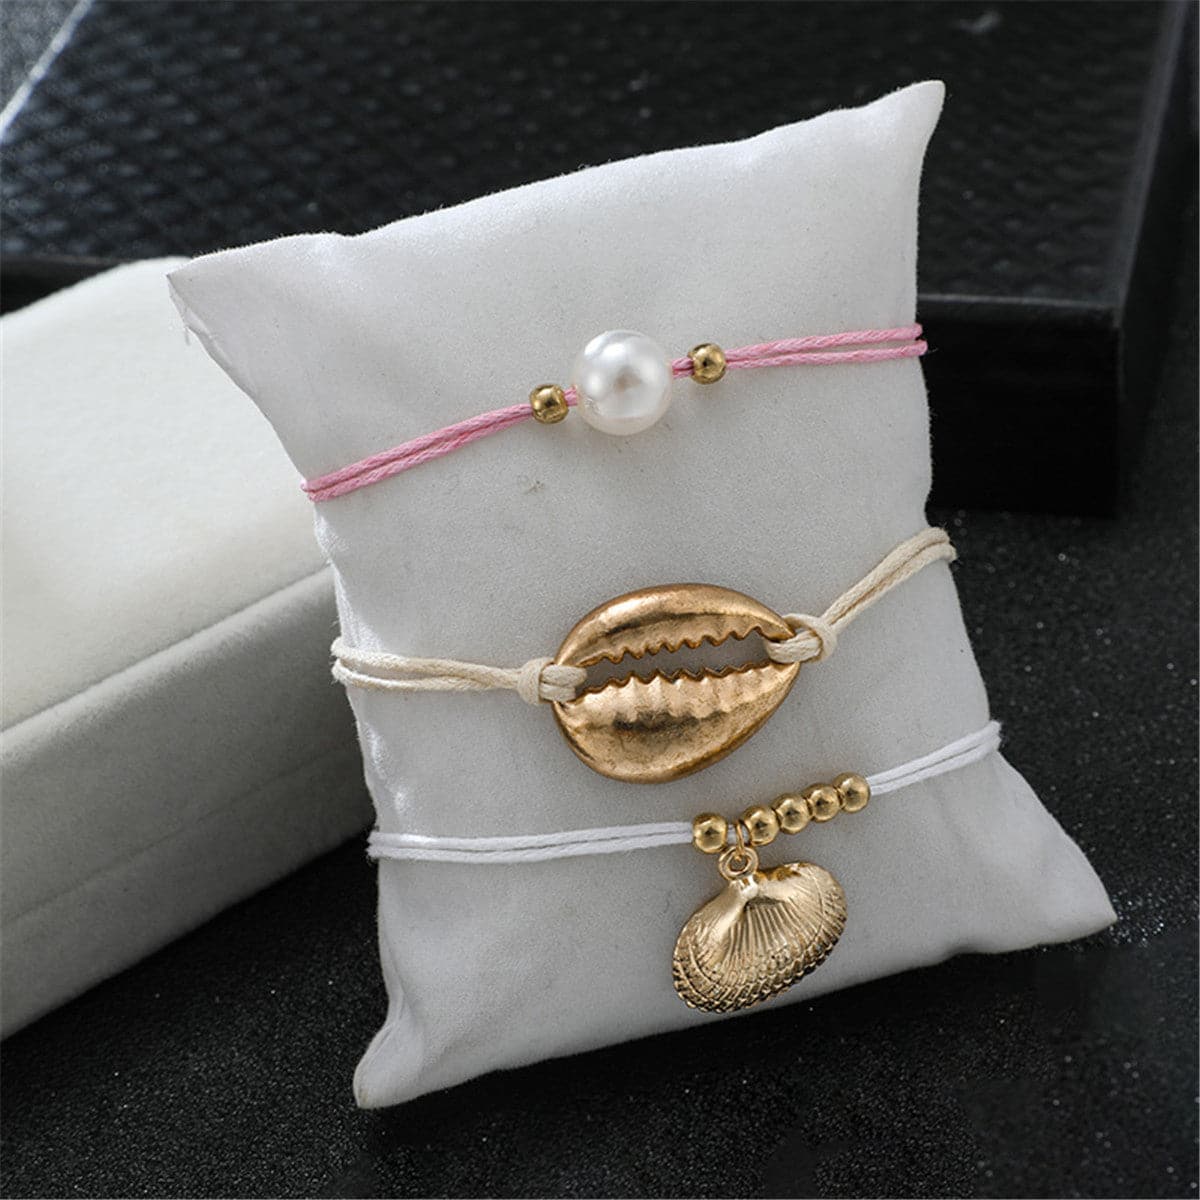 Pearl & 18K Gold-Plated Seashell Charm Anklet Set